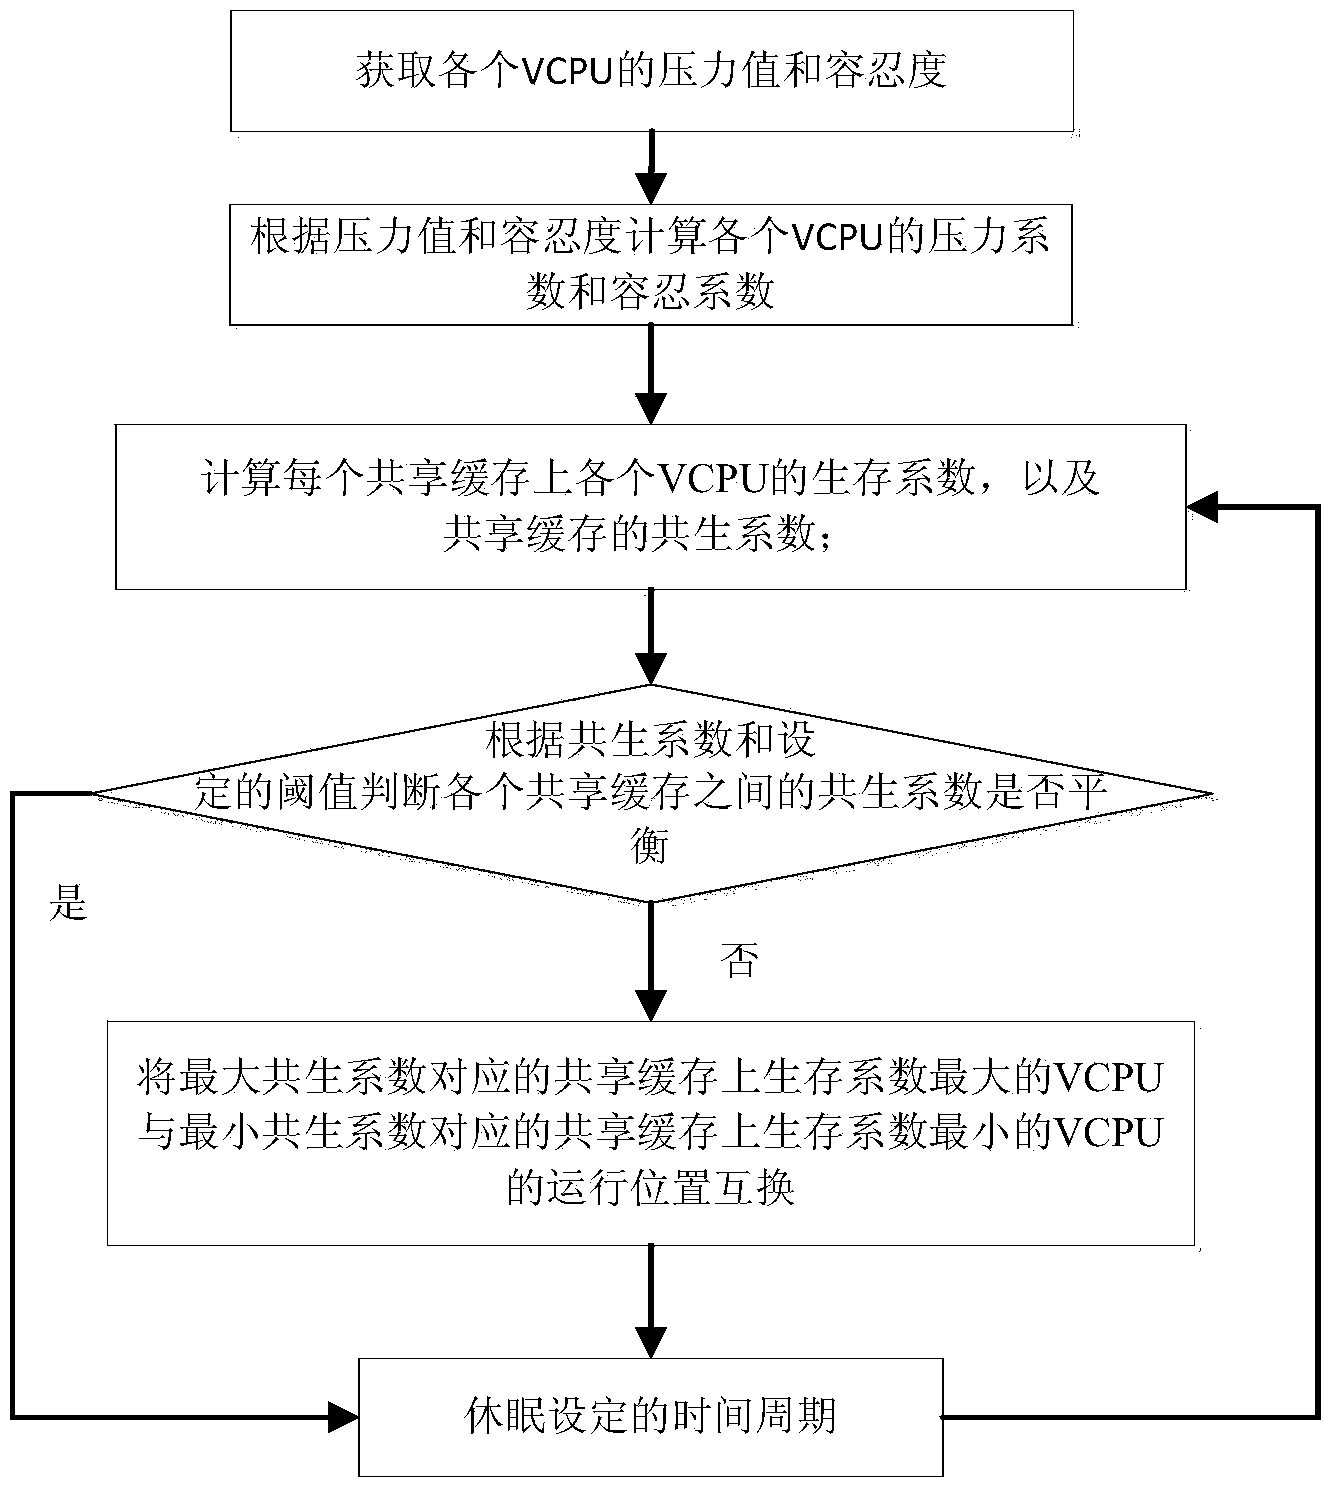 Virtual machine scheduling method based on coexisting coefficient balance